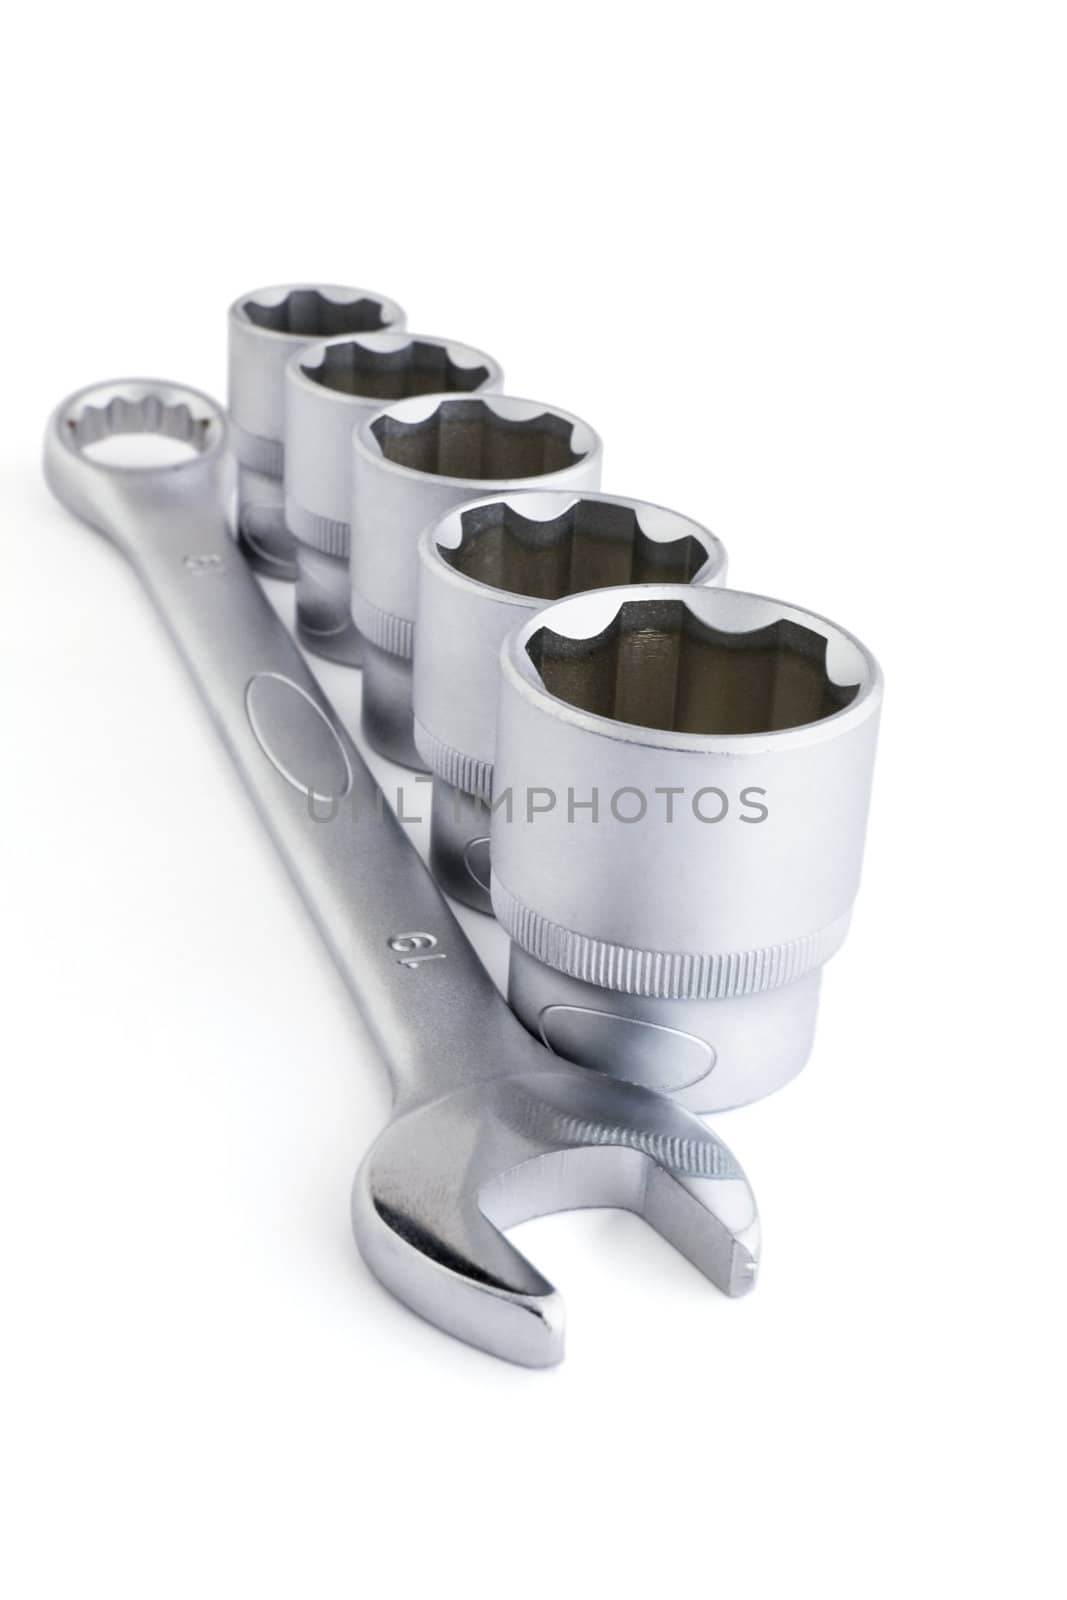 metallic wrench tools on isolated white background